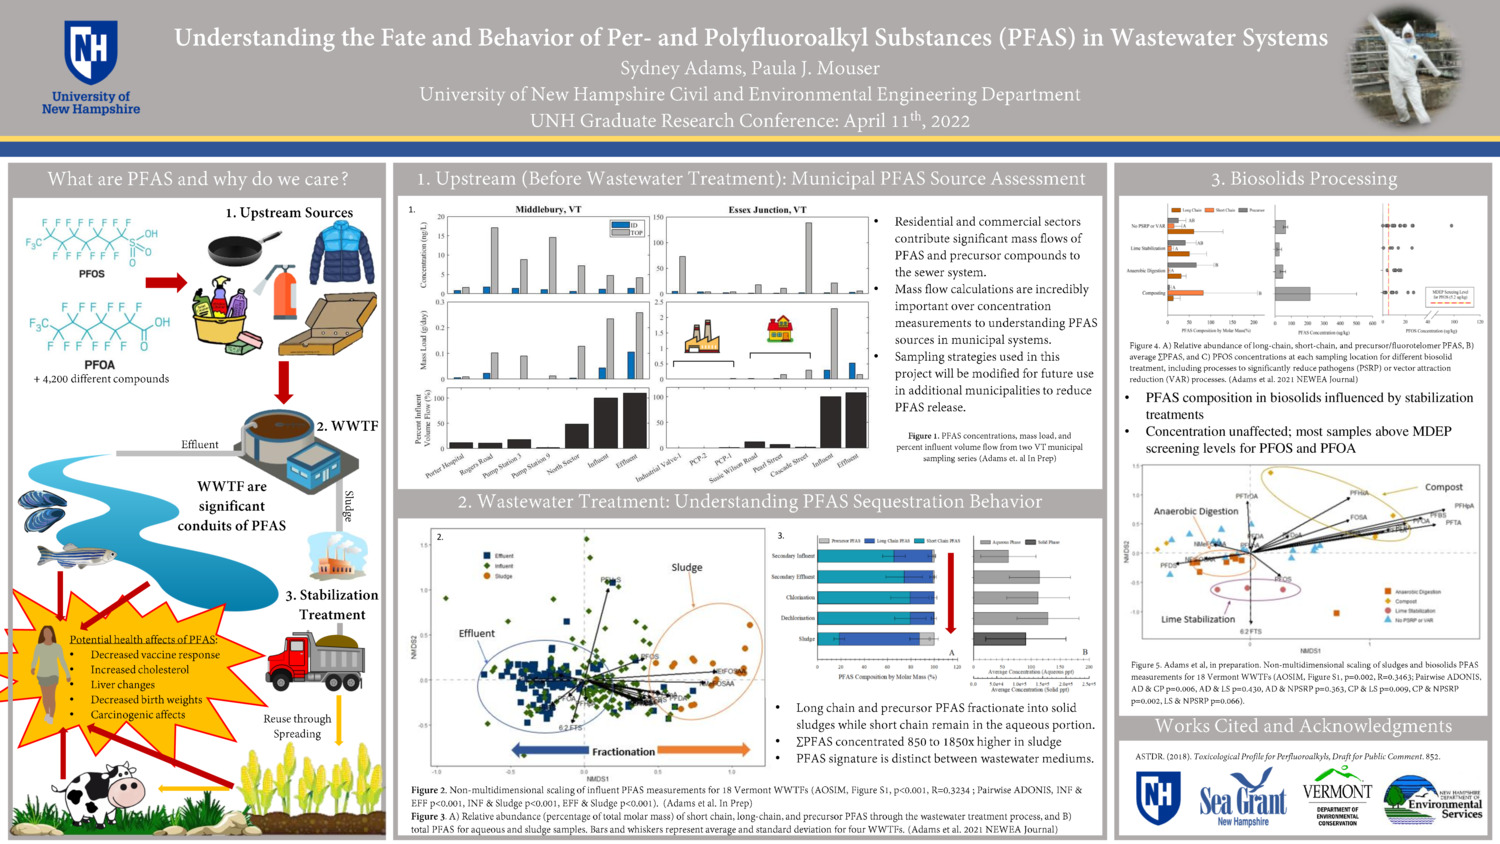 Understanding The Fate And Behavior Of Per- And Polyfluoroalkyl Substances (Pfas) In Wastewater Systems by sydneyadams1